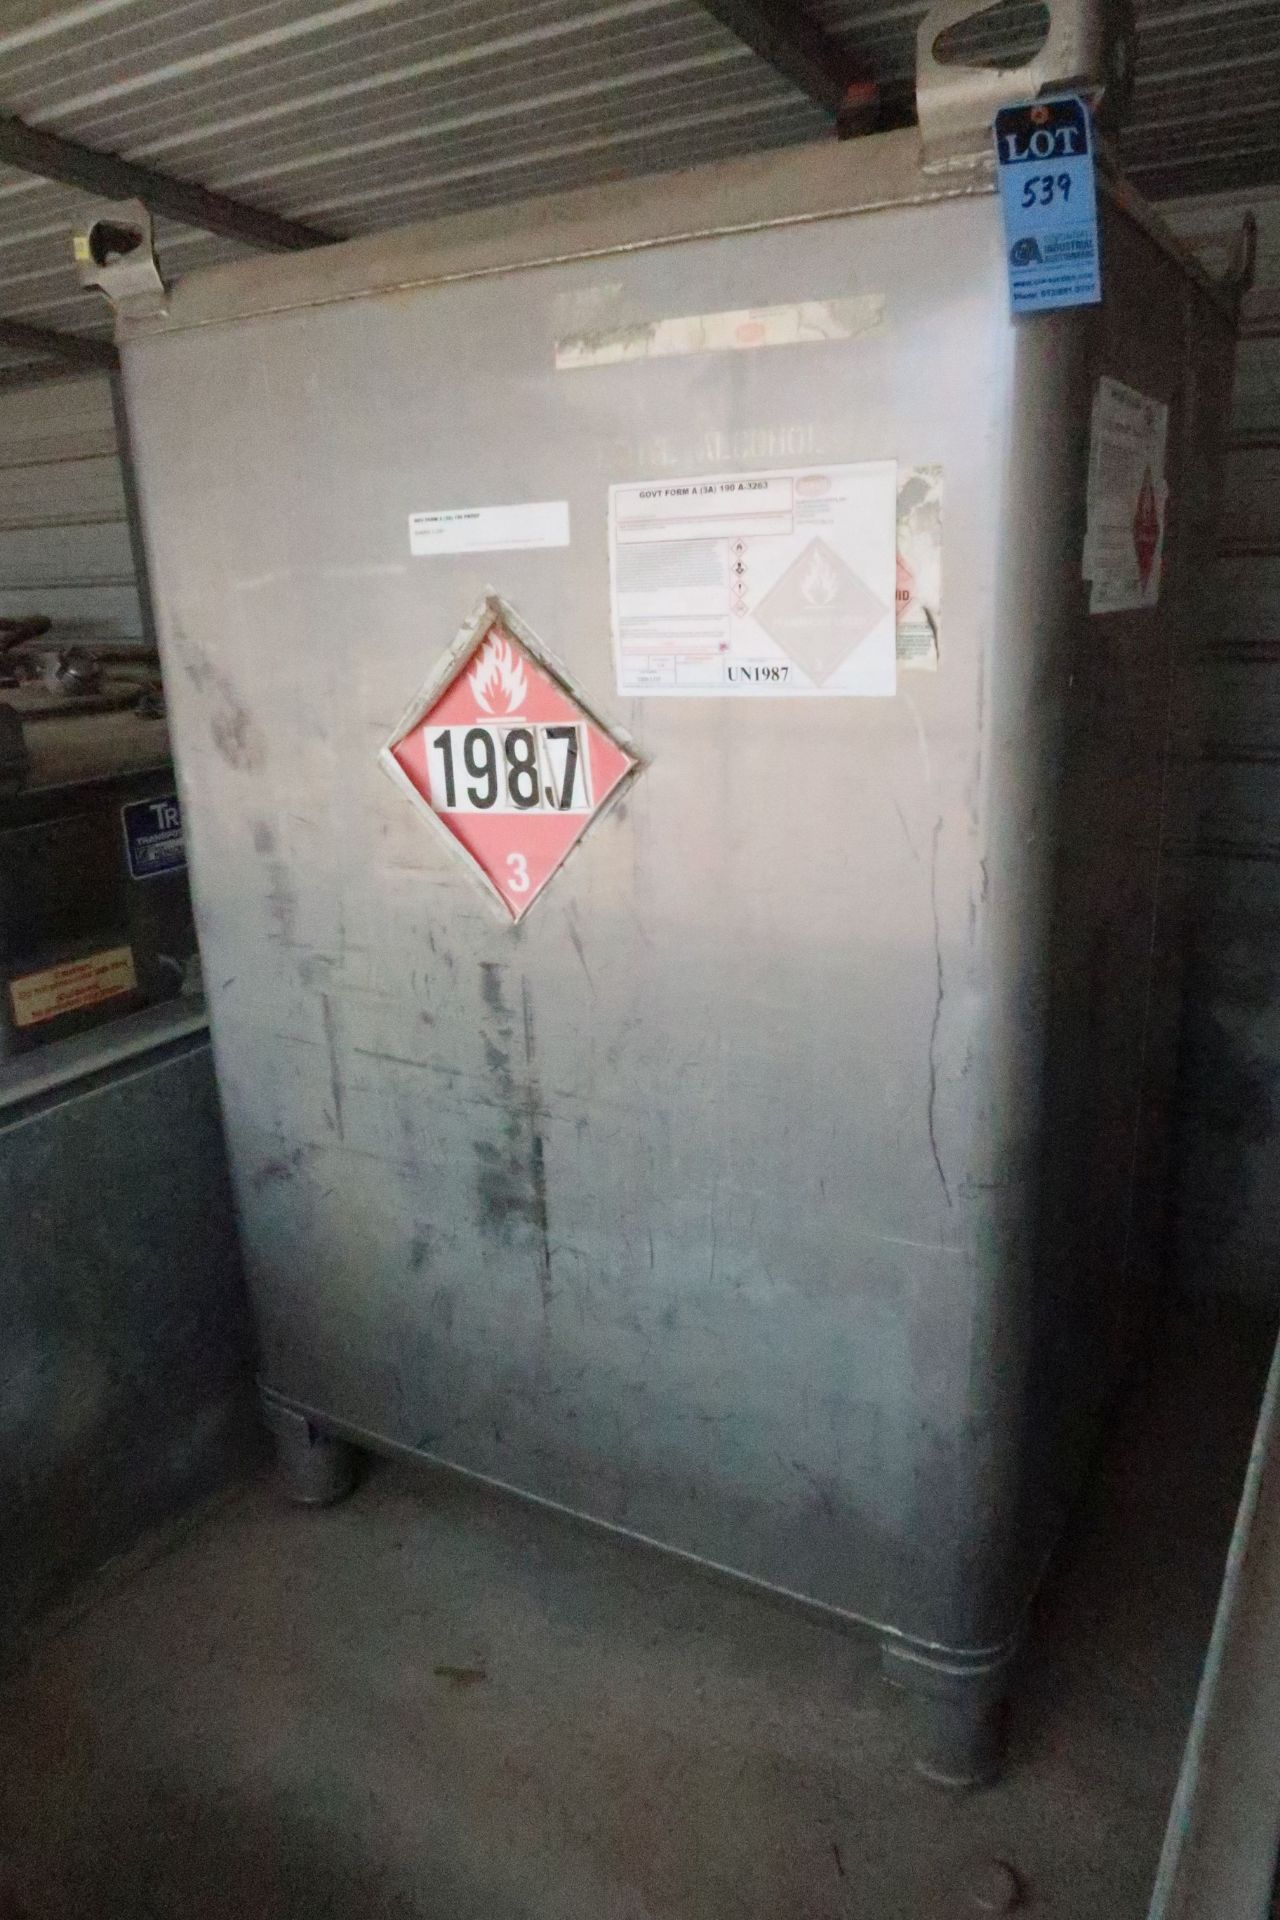 MISC. STAINLESS STEEL FLAMMABLE MATERIAL TANKS; (1) 549-GAL. UN1987 ALCOHOL TANK - Image 2 of 7